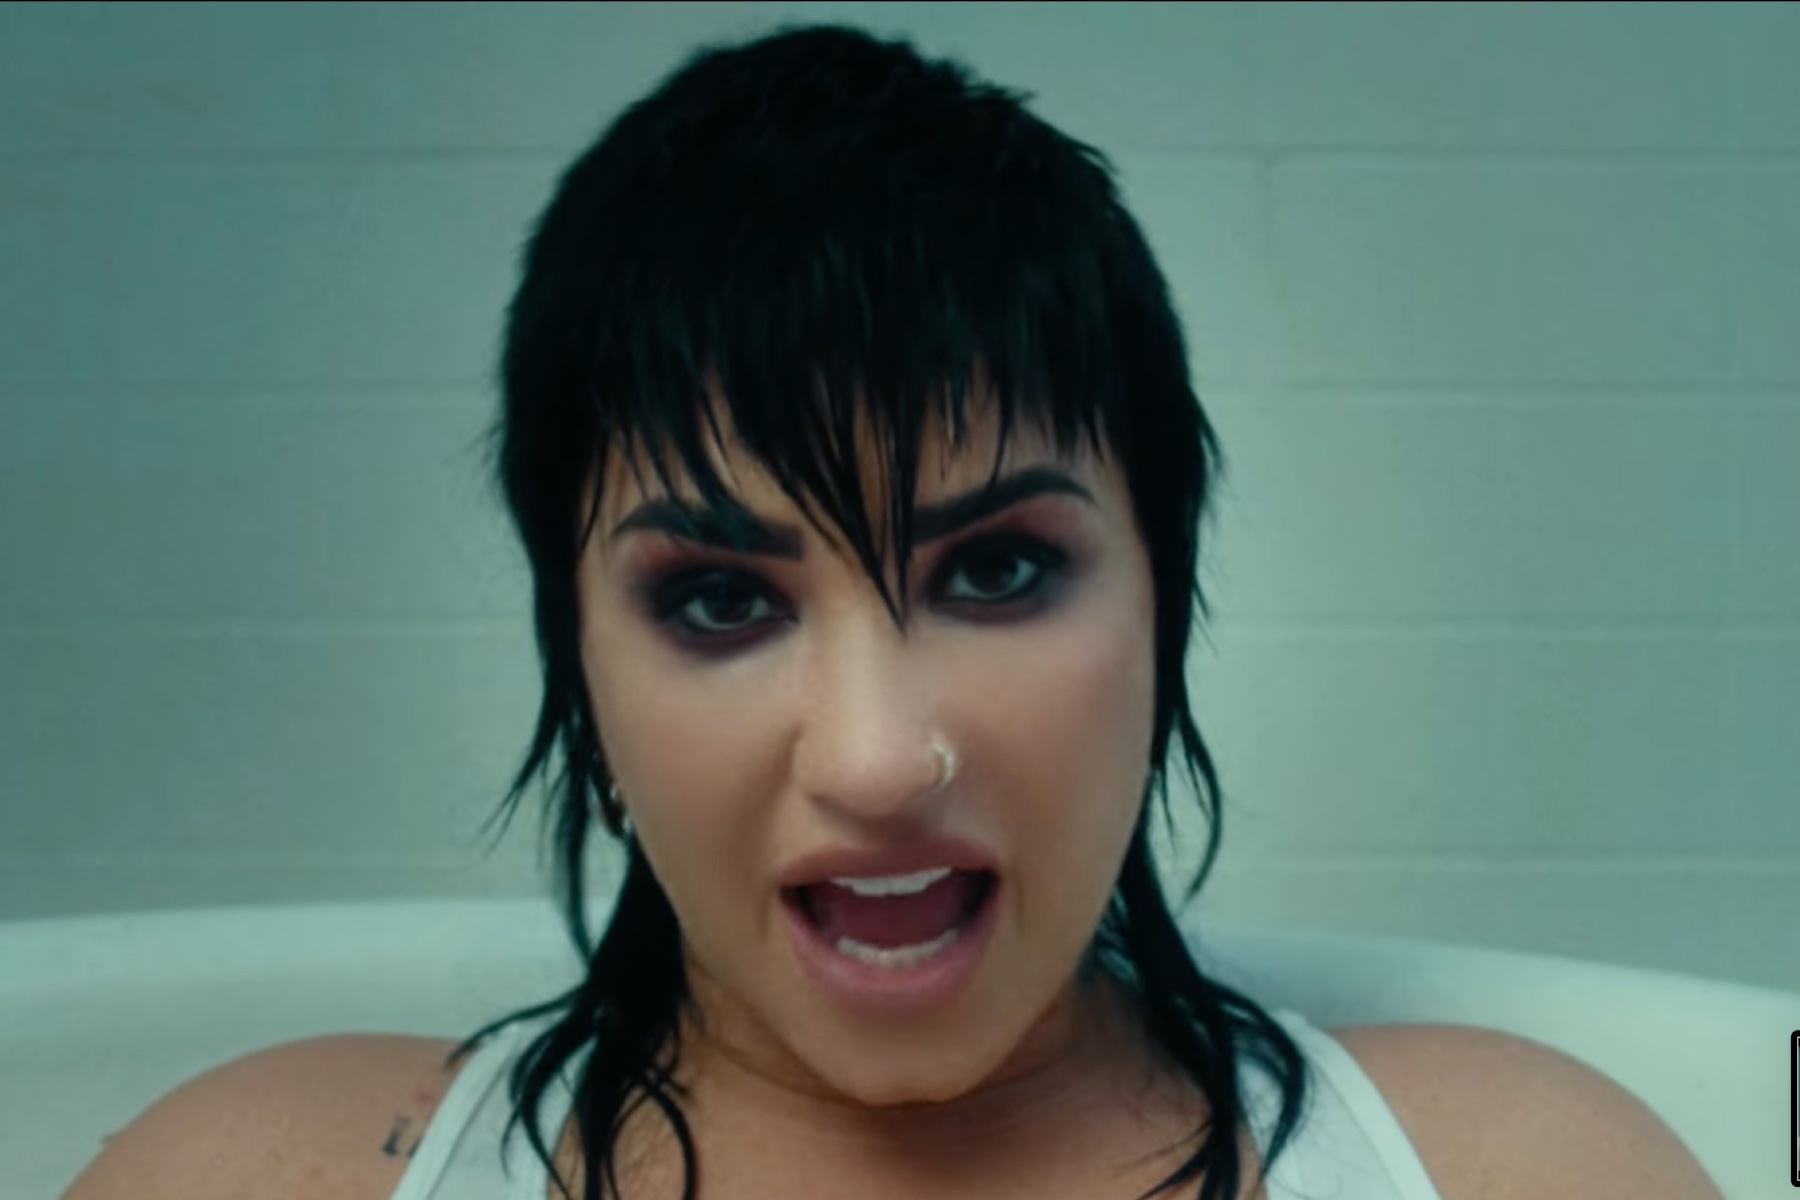 in article about Holy Fvck by Demi Lovato, a screenshot from the video skin of my teeth